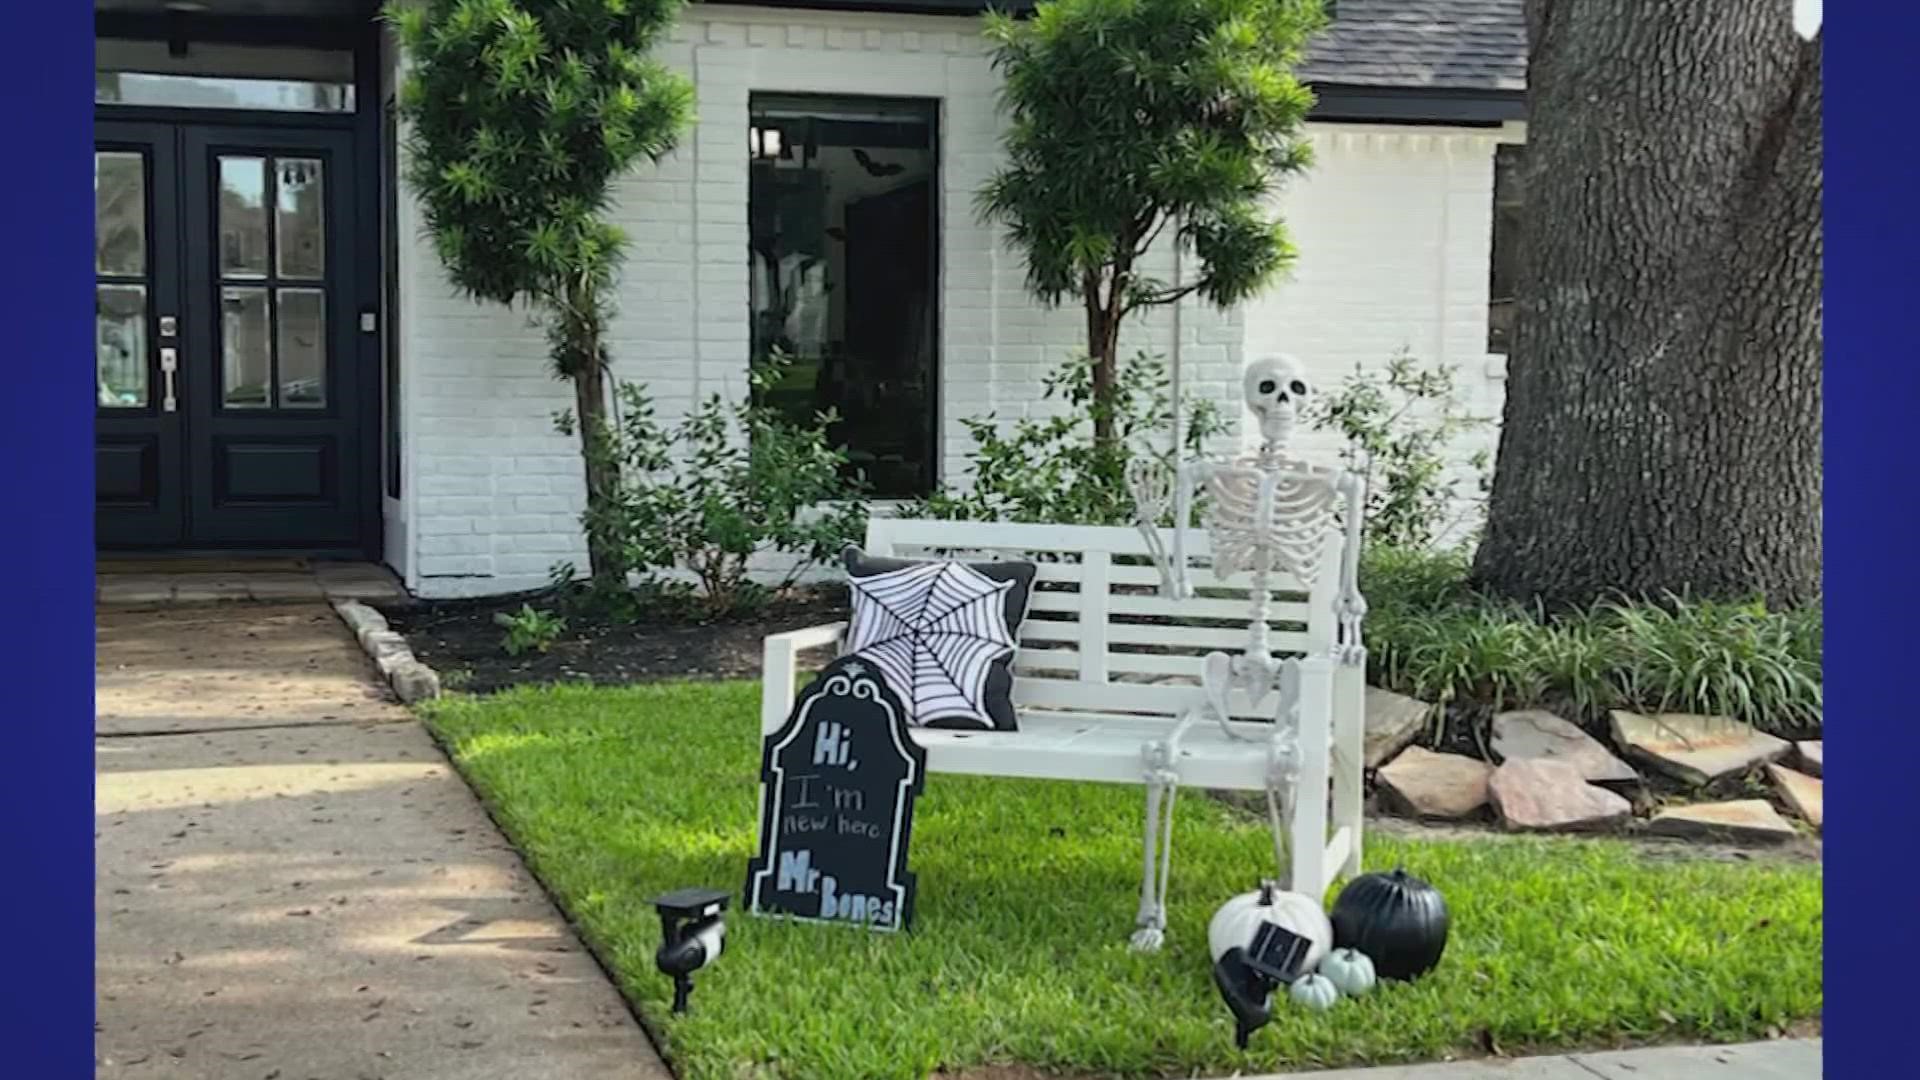 The story of Mr. & Mrs. Bones is capturing the hearts and laughs of a Pearland neighborhood. The Halloween display changes daily. You never know what you'll see next